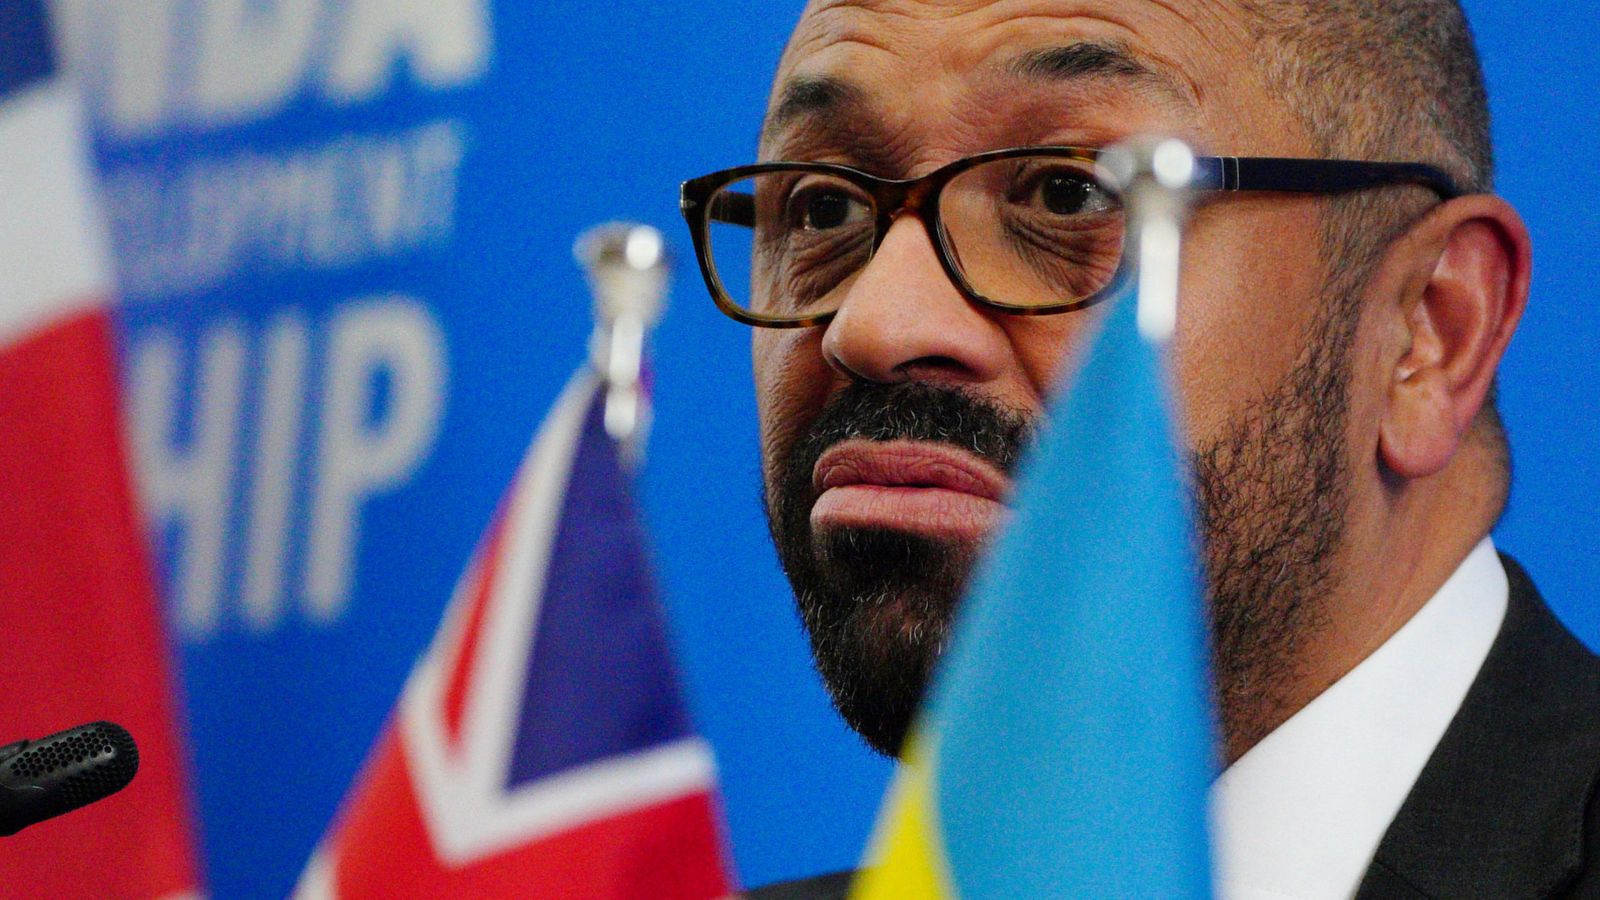 Home secretary James Cleverly spent £165,000 on private chartered flight to Rwanda